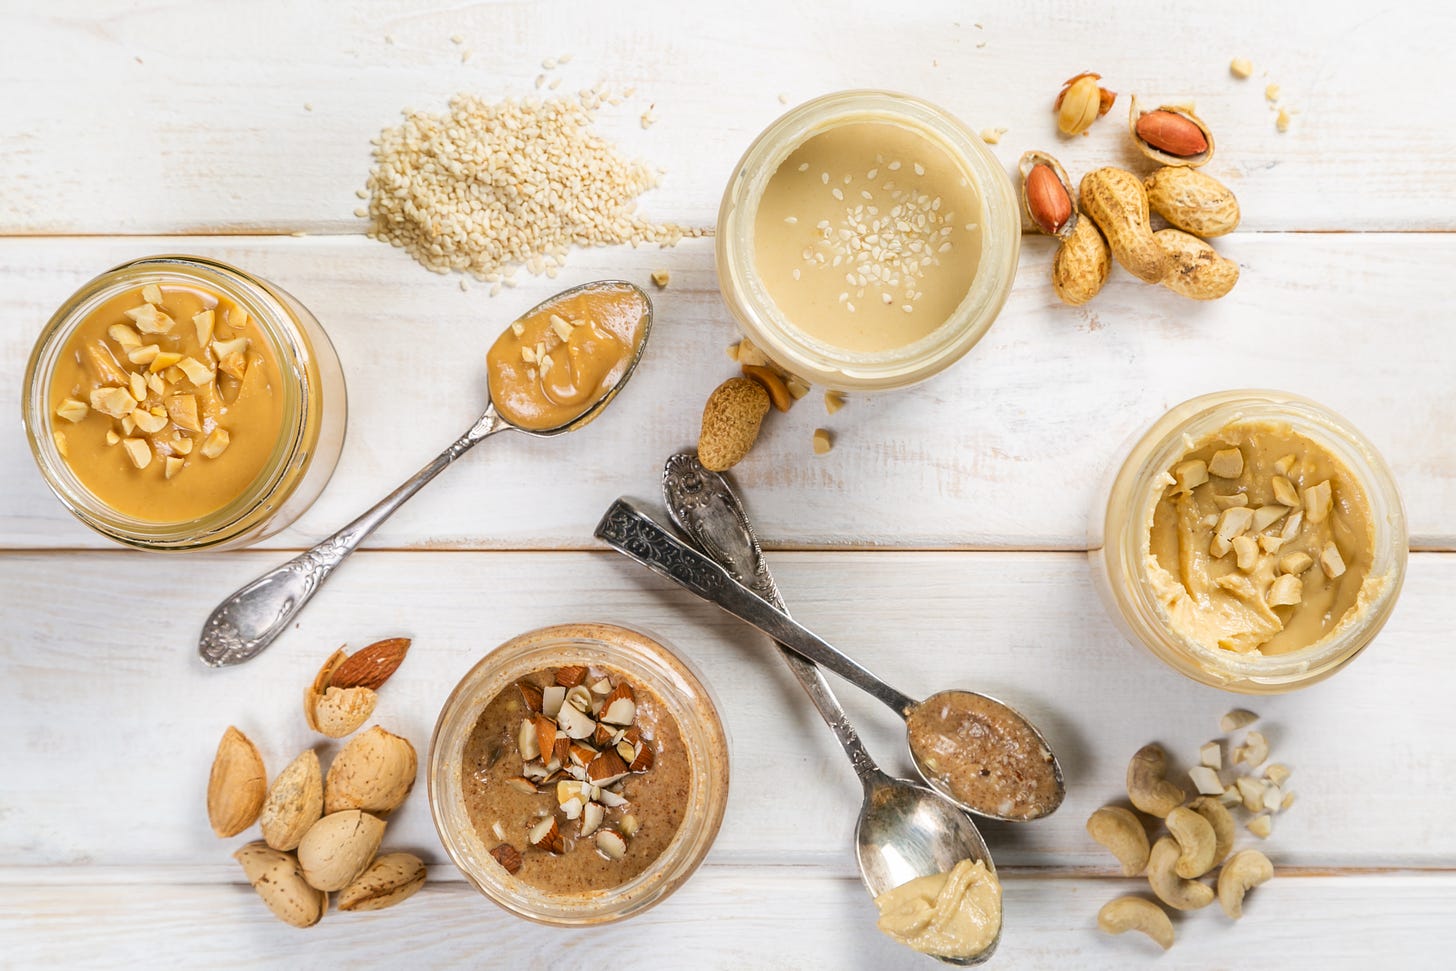 Nut butters, with their creamy textures and rich flavors, are a sublime culinary delight, elevating any dish with their wholesome goodness and versatility.